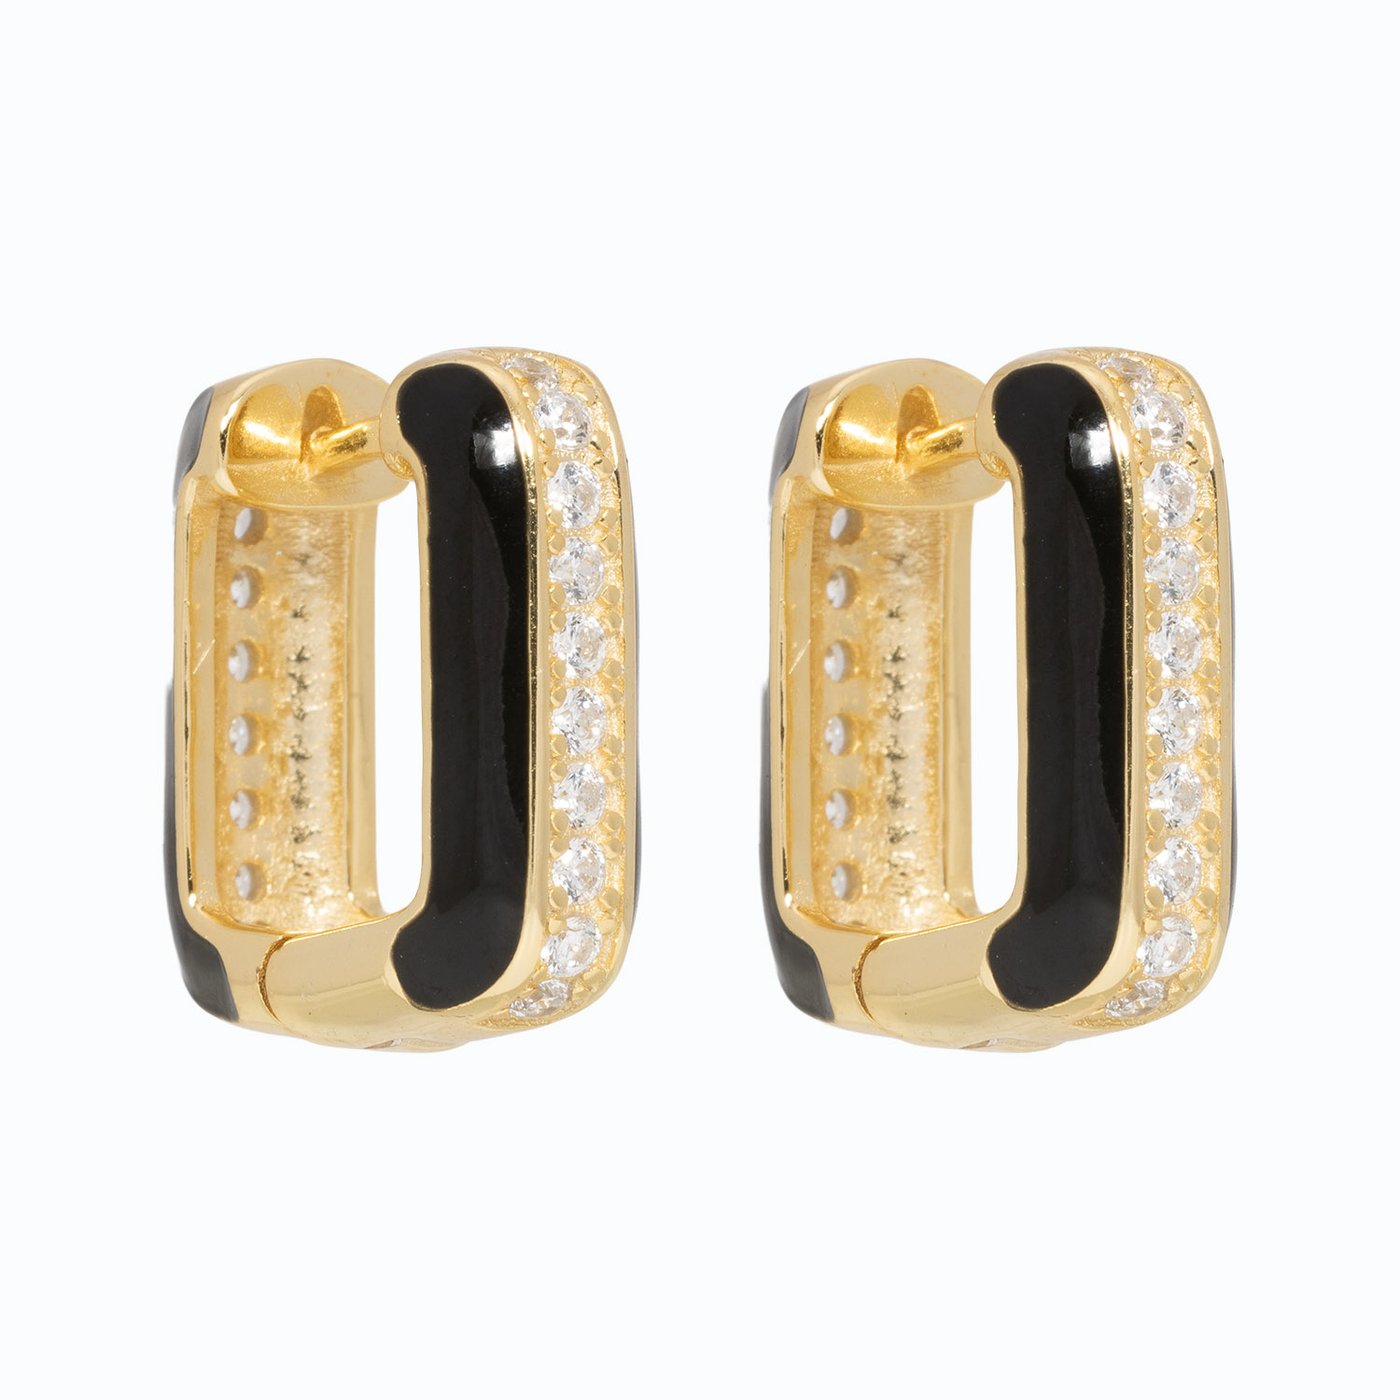 Lillys Amsterdam Gold Square Off Earrings